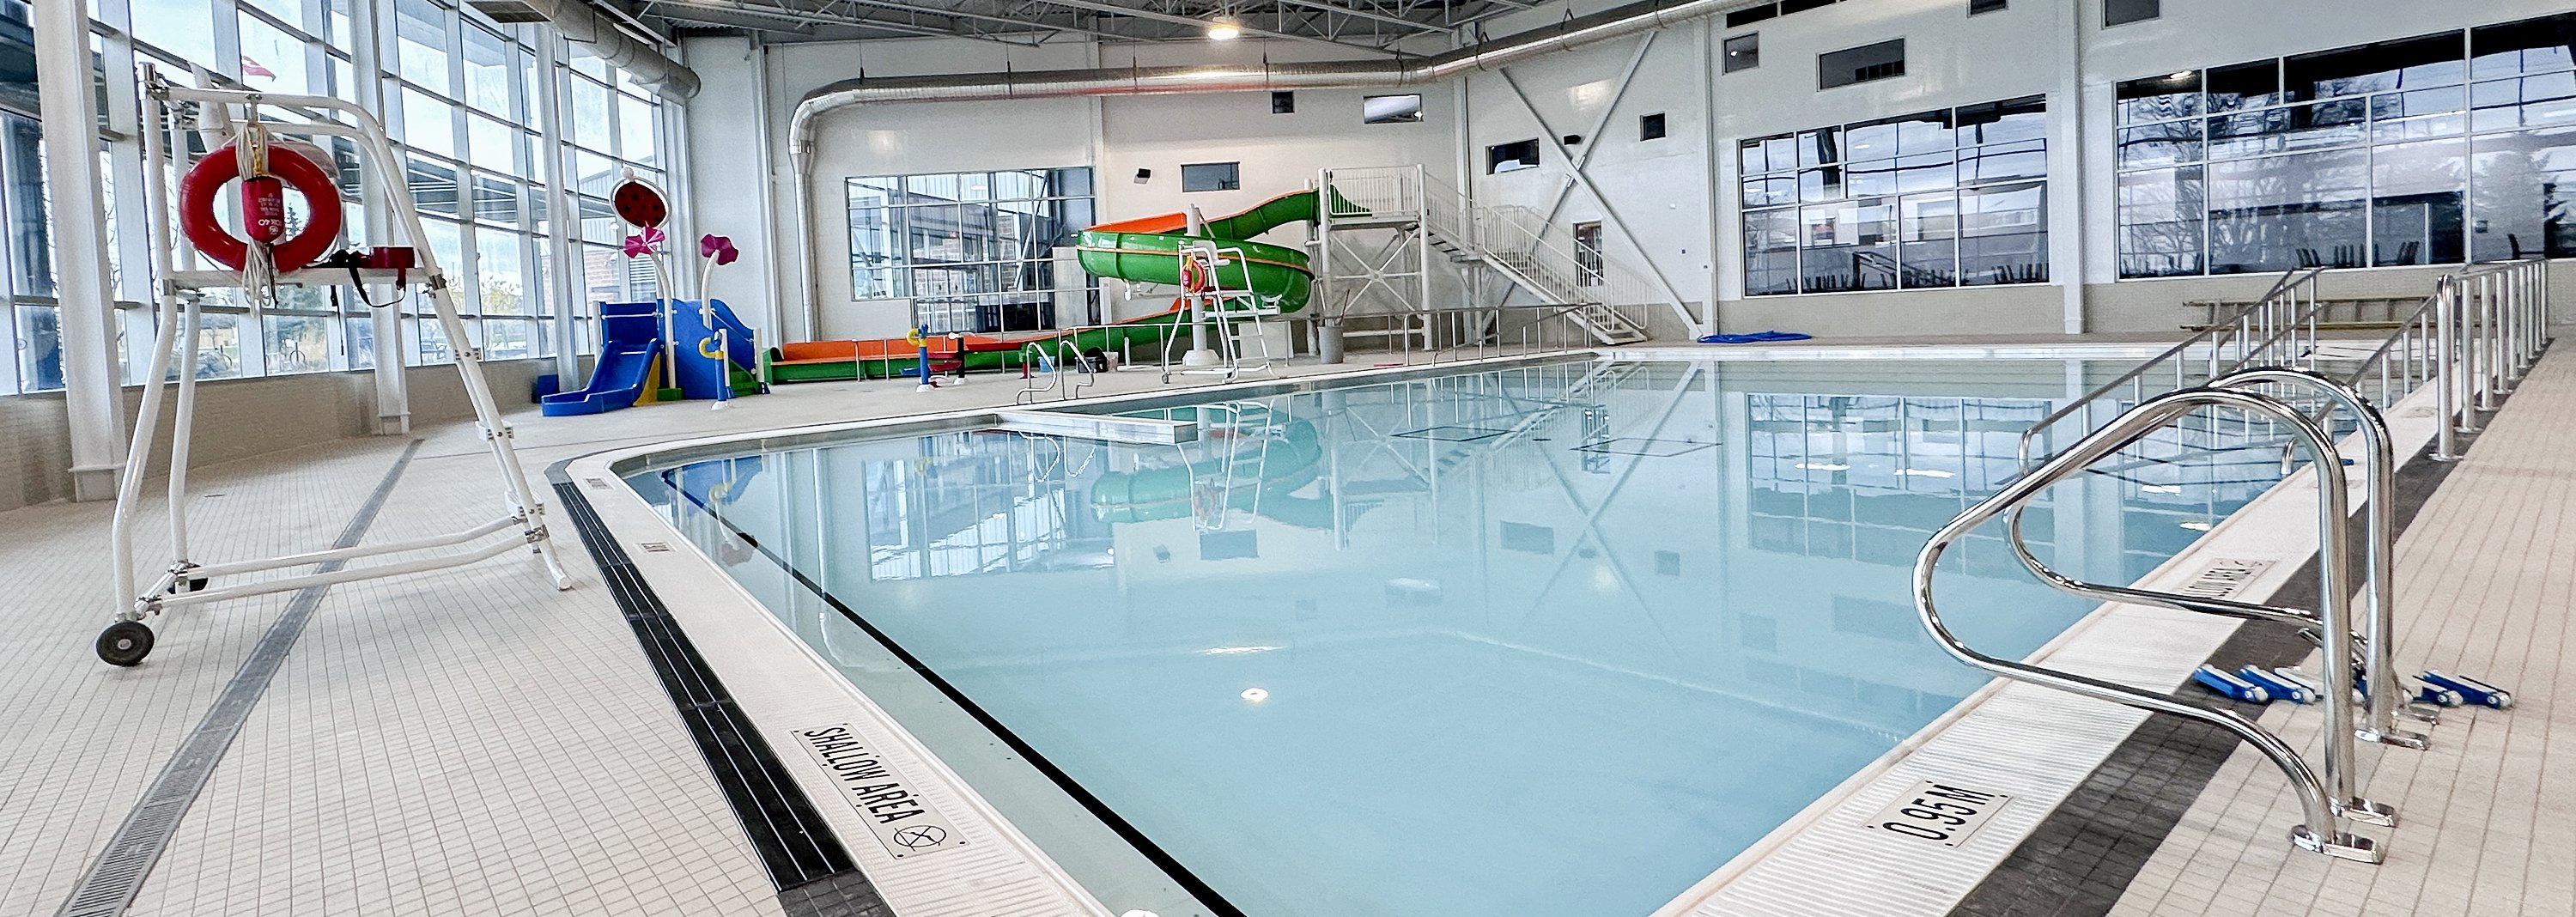 A pool with a lifeguard chair to the left and an indoor play area and water slides behind it